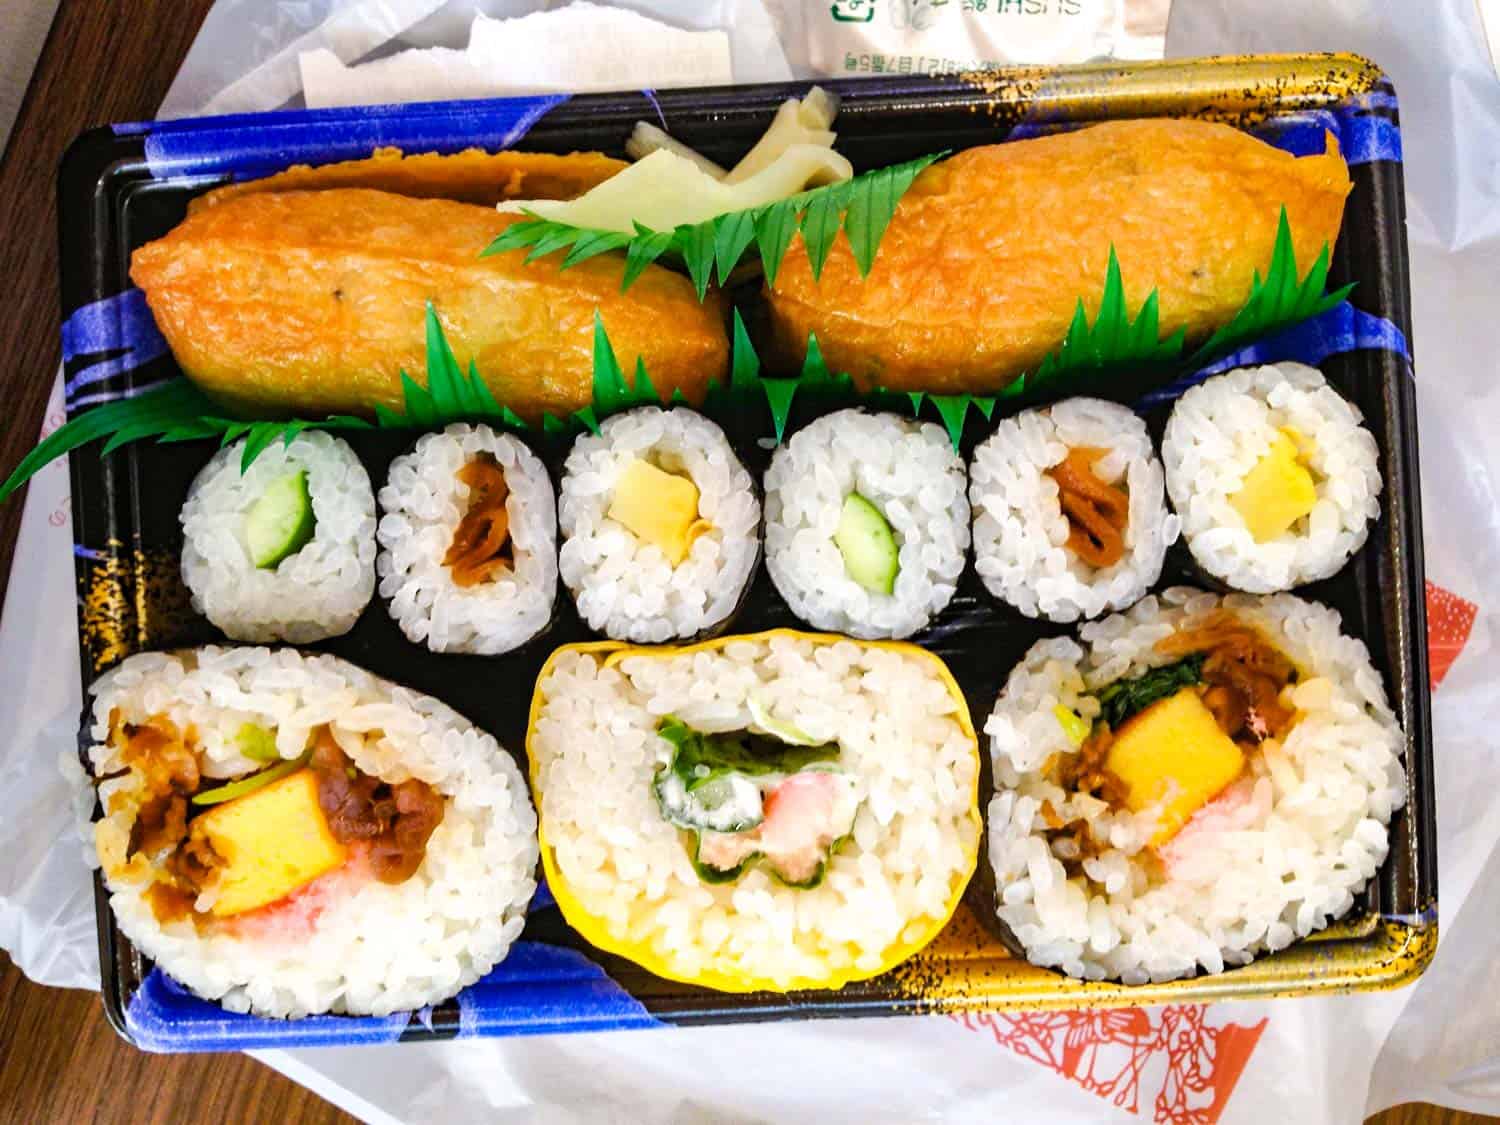 Sushi is one of the most popular things to eat in Japan